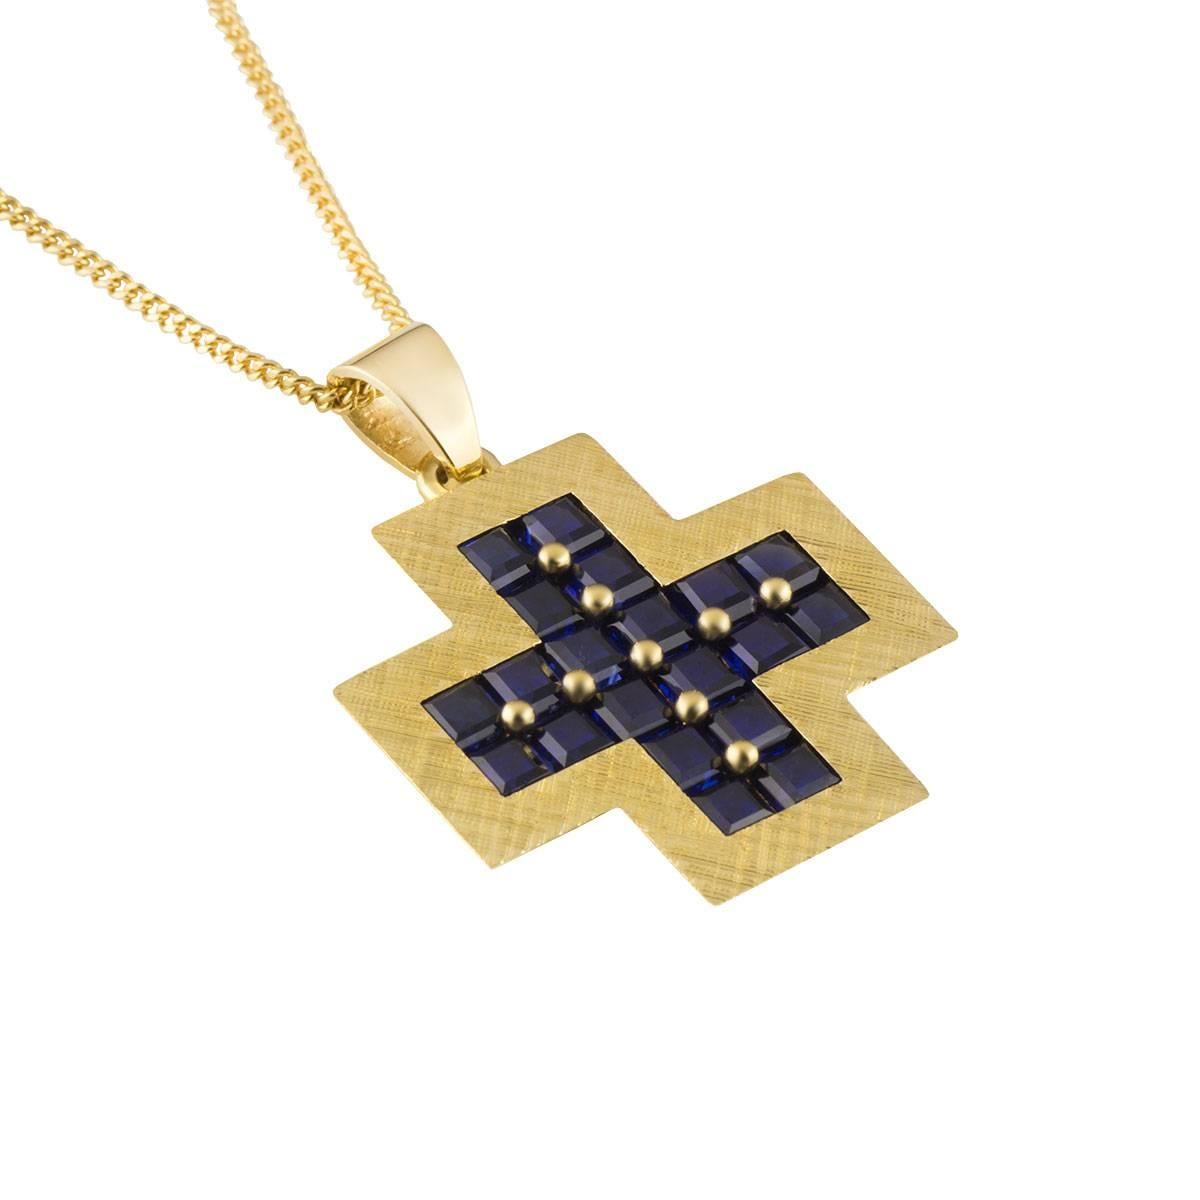 A beautiful 18k yellow gold sapphire pendant. The pendant comprises of a cross motif with 20 princess cut sapphires in a claw setting, with a total weight of approximately 2.60ct, with a deep blue hue throughout. The pendant measures 26mm in height